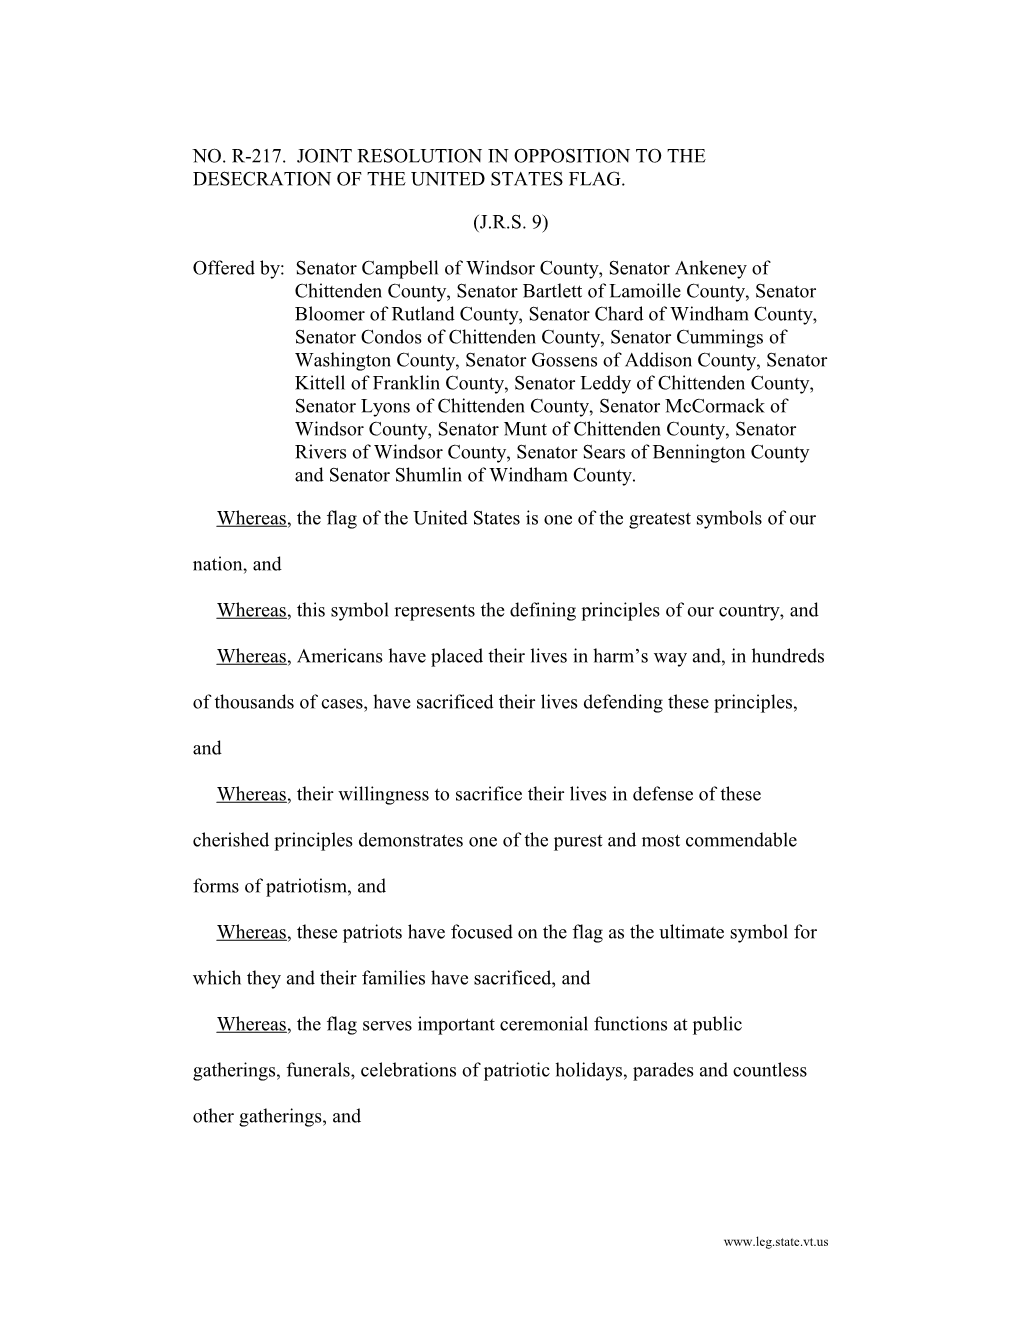 NO. R-217. JOINT RESOLUTION in Opposition to the Desecration of the United States Flag